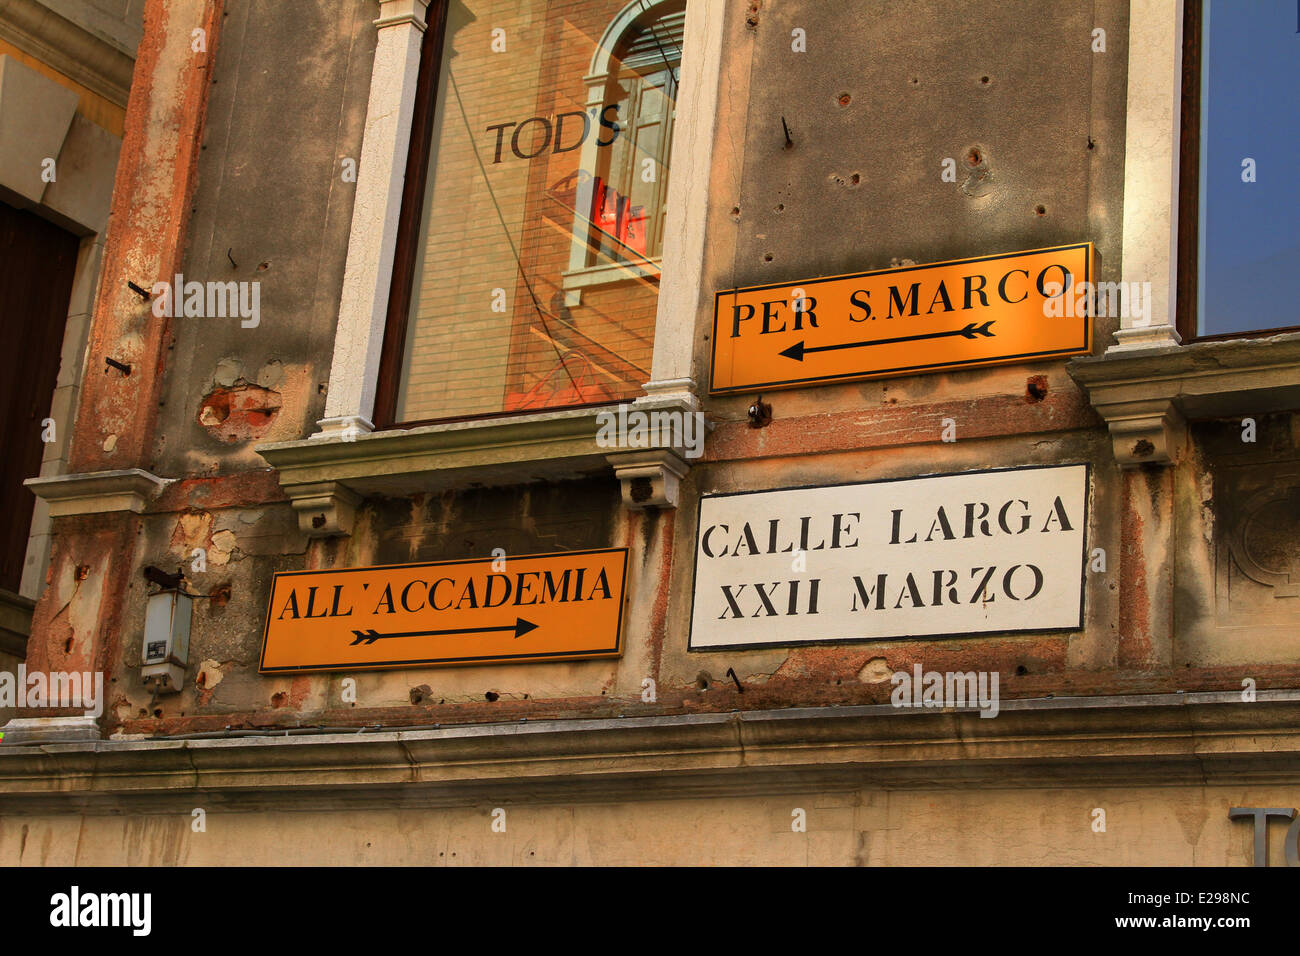 Venice, Tod's,Per S.Marco, All'accademia, Calle Larga XXII Marzo. Orange signs directional walking around the back allays Venice Stock Photo